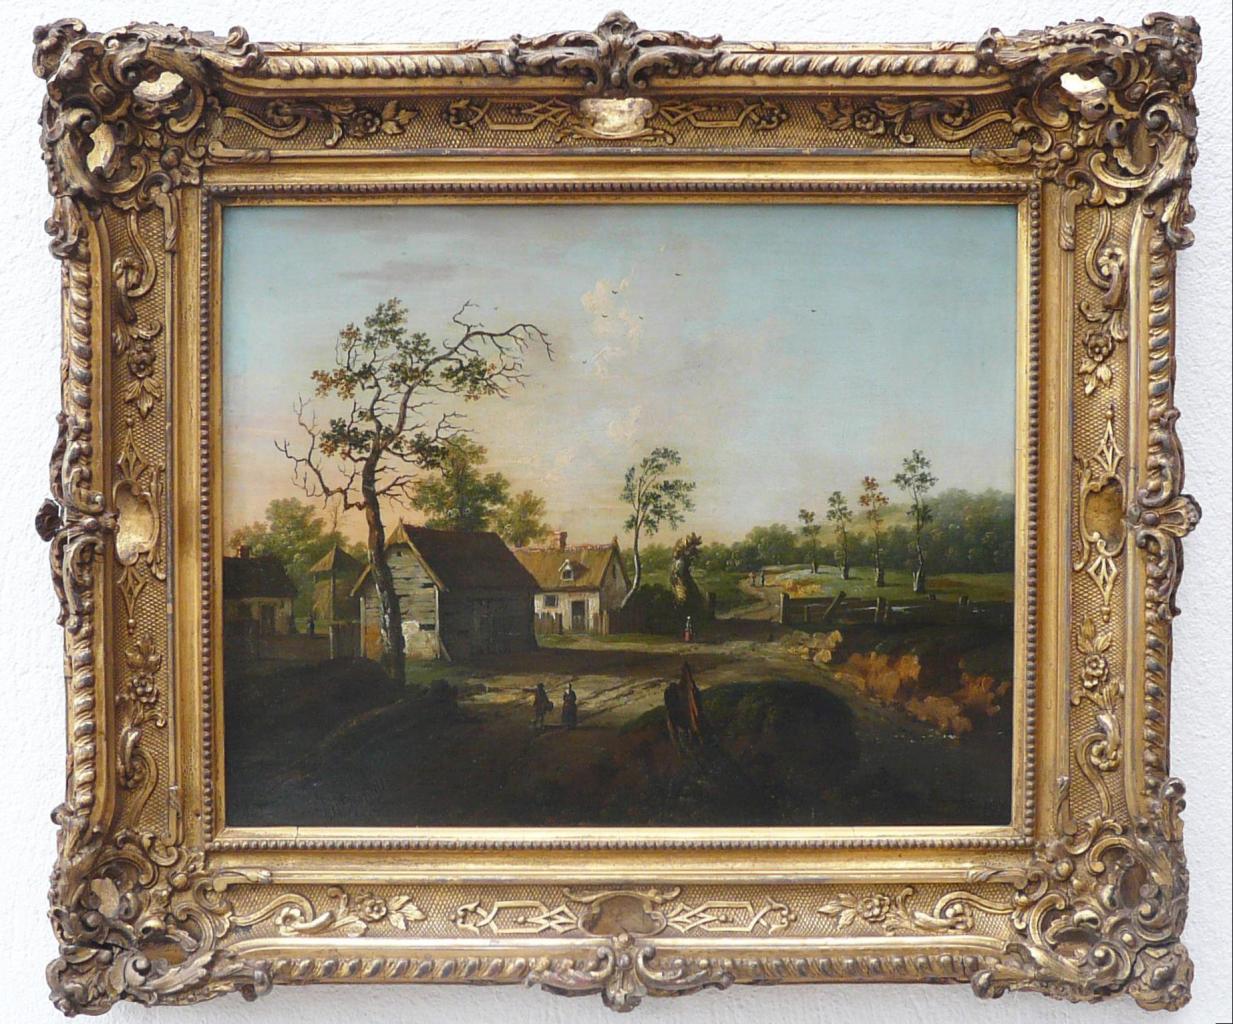 Farmstead - Painting by William Tomkins